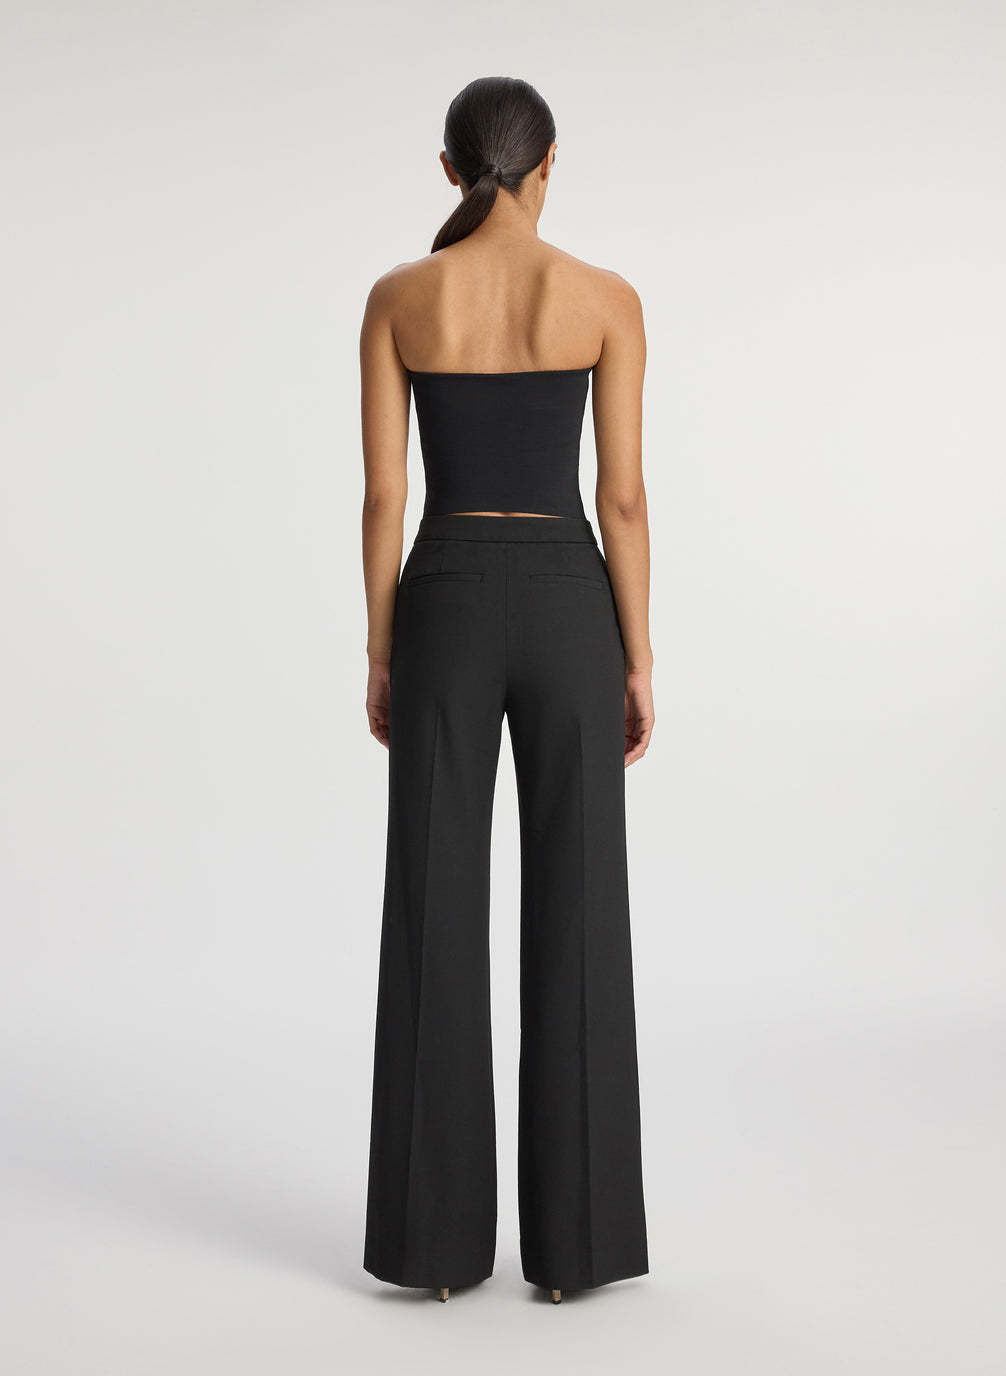 back view of woman wearing black strapless top and black pants